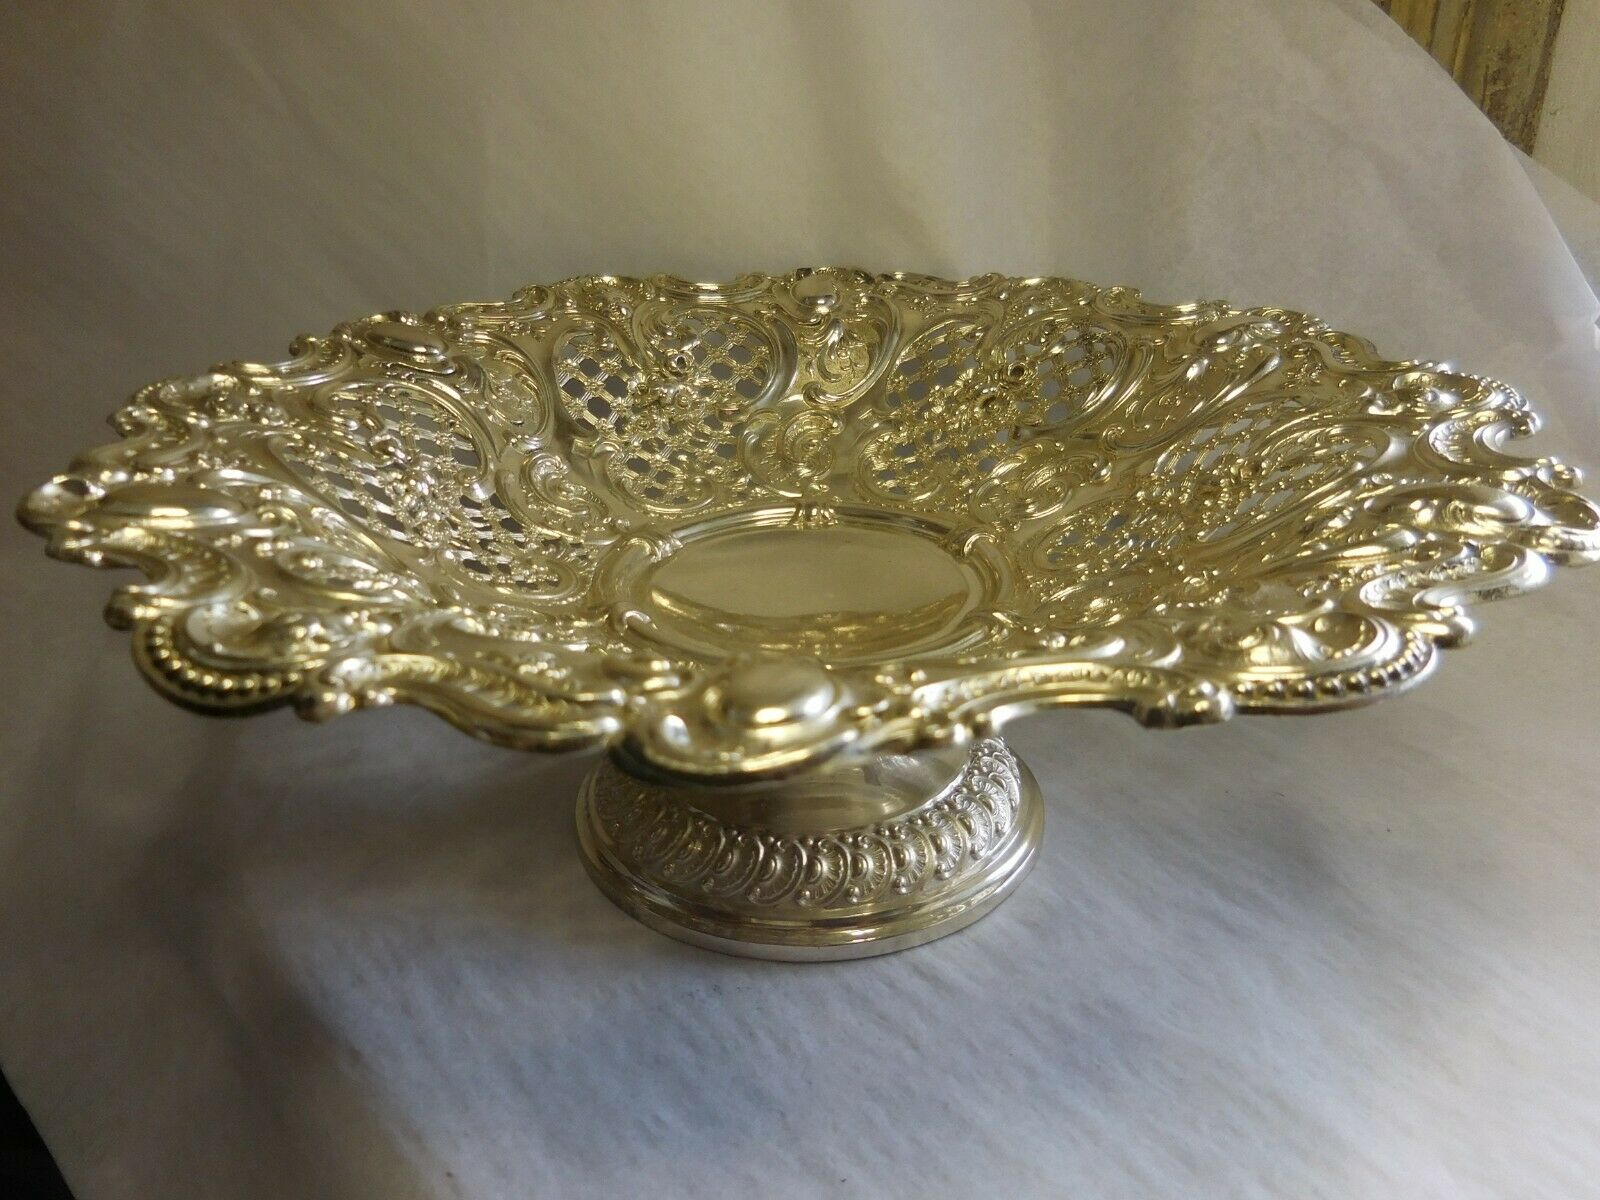 Fancy German 800 Silver Compote With Floral Lattice Work, Cherub Faces 1900